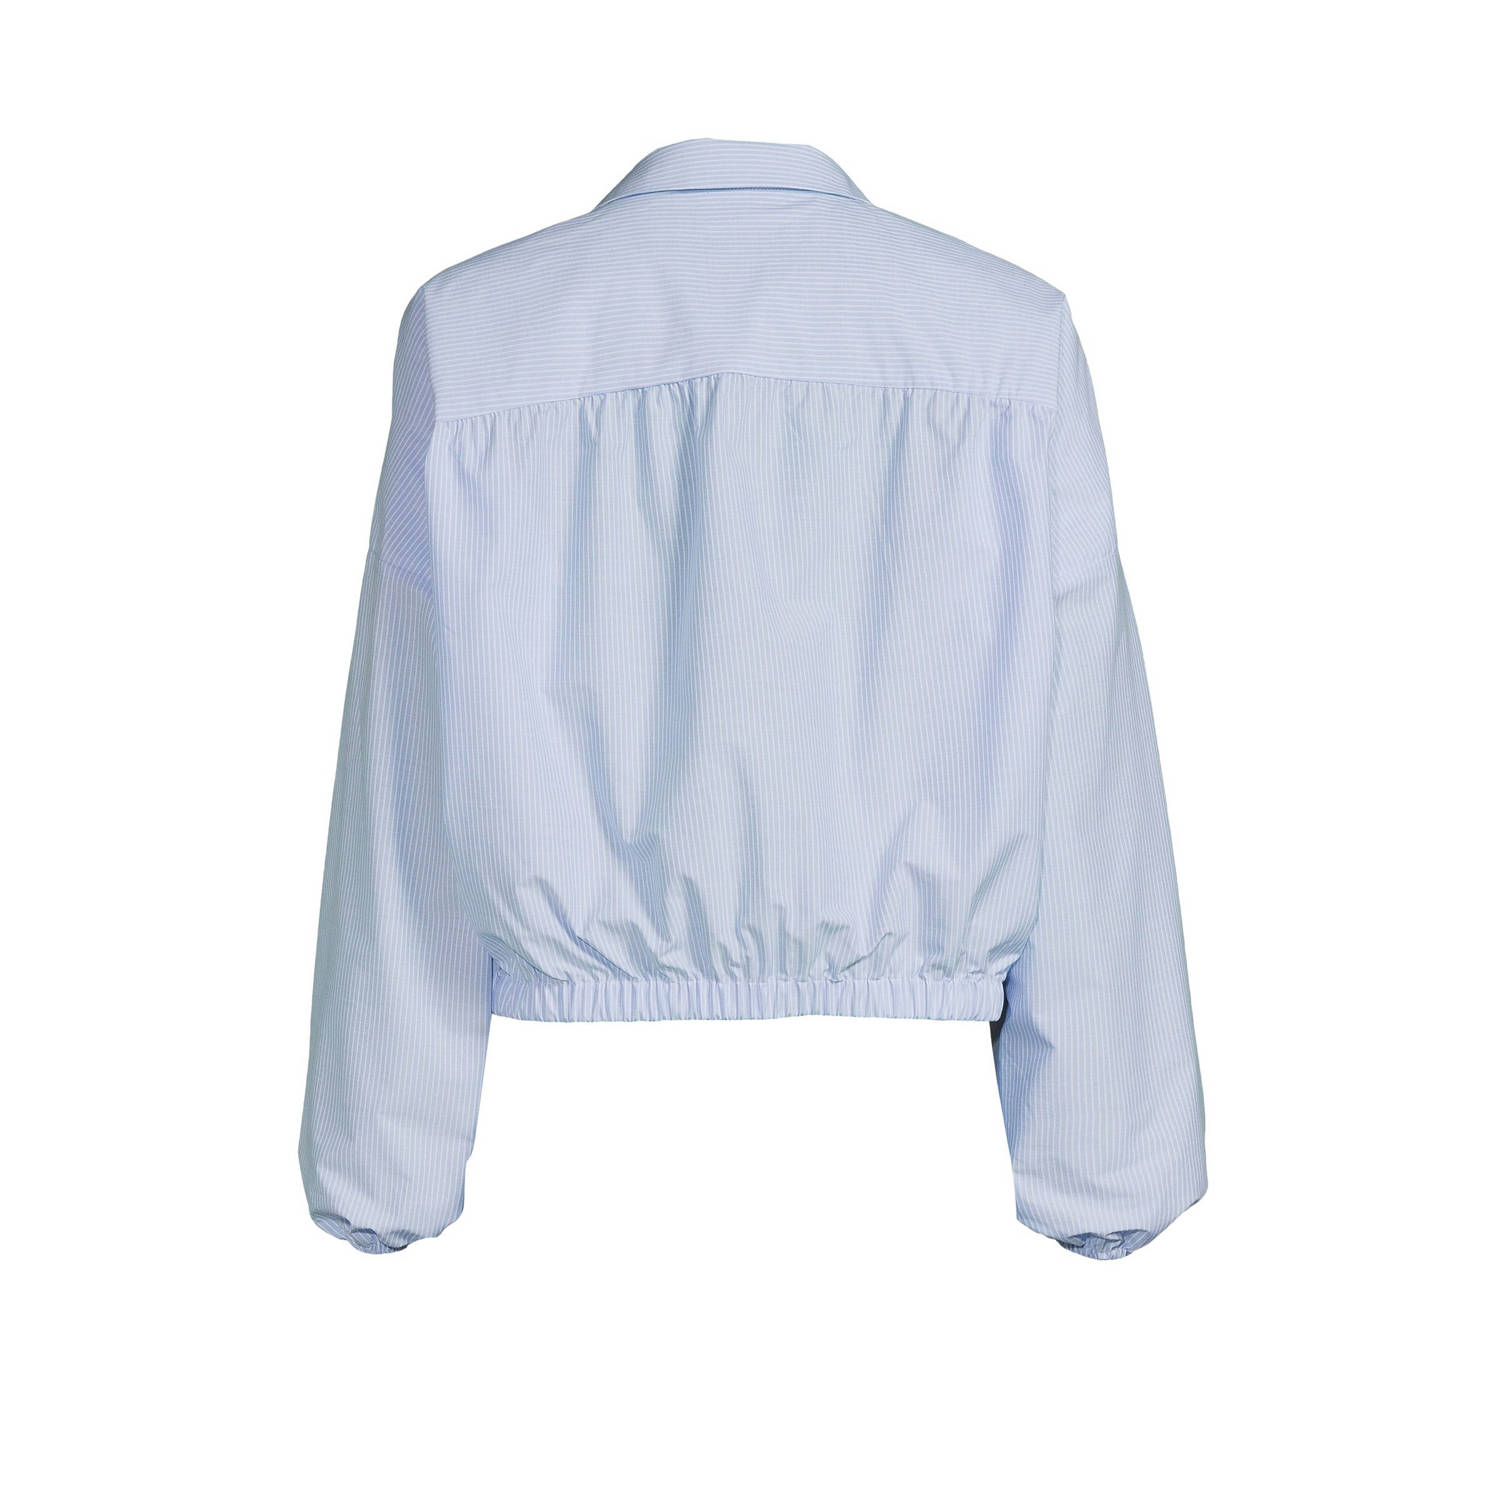 FREEQUENT gestreepte blouse blauw wit